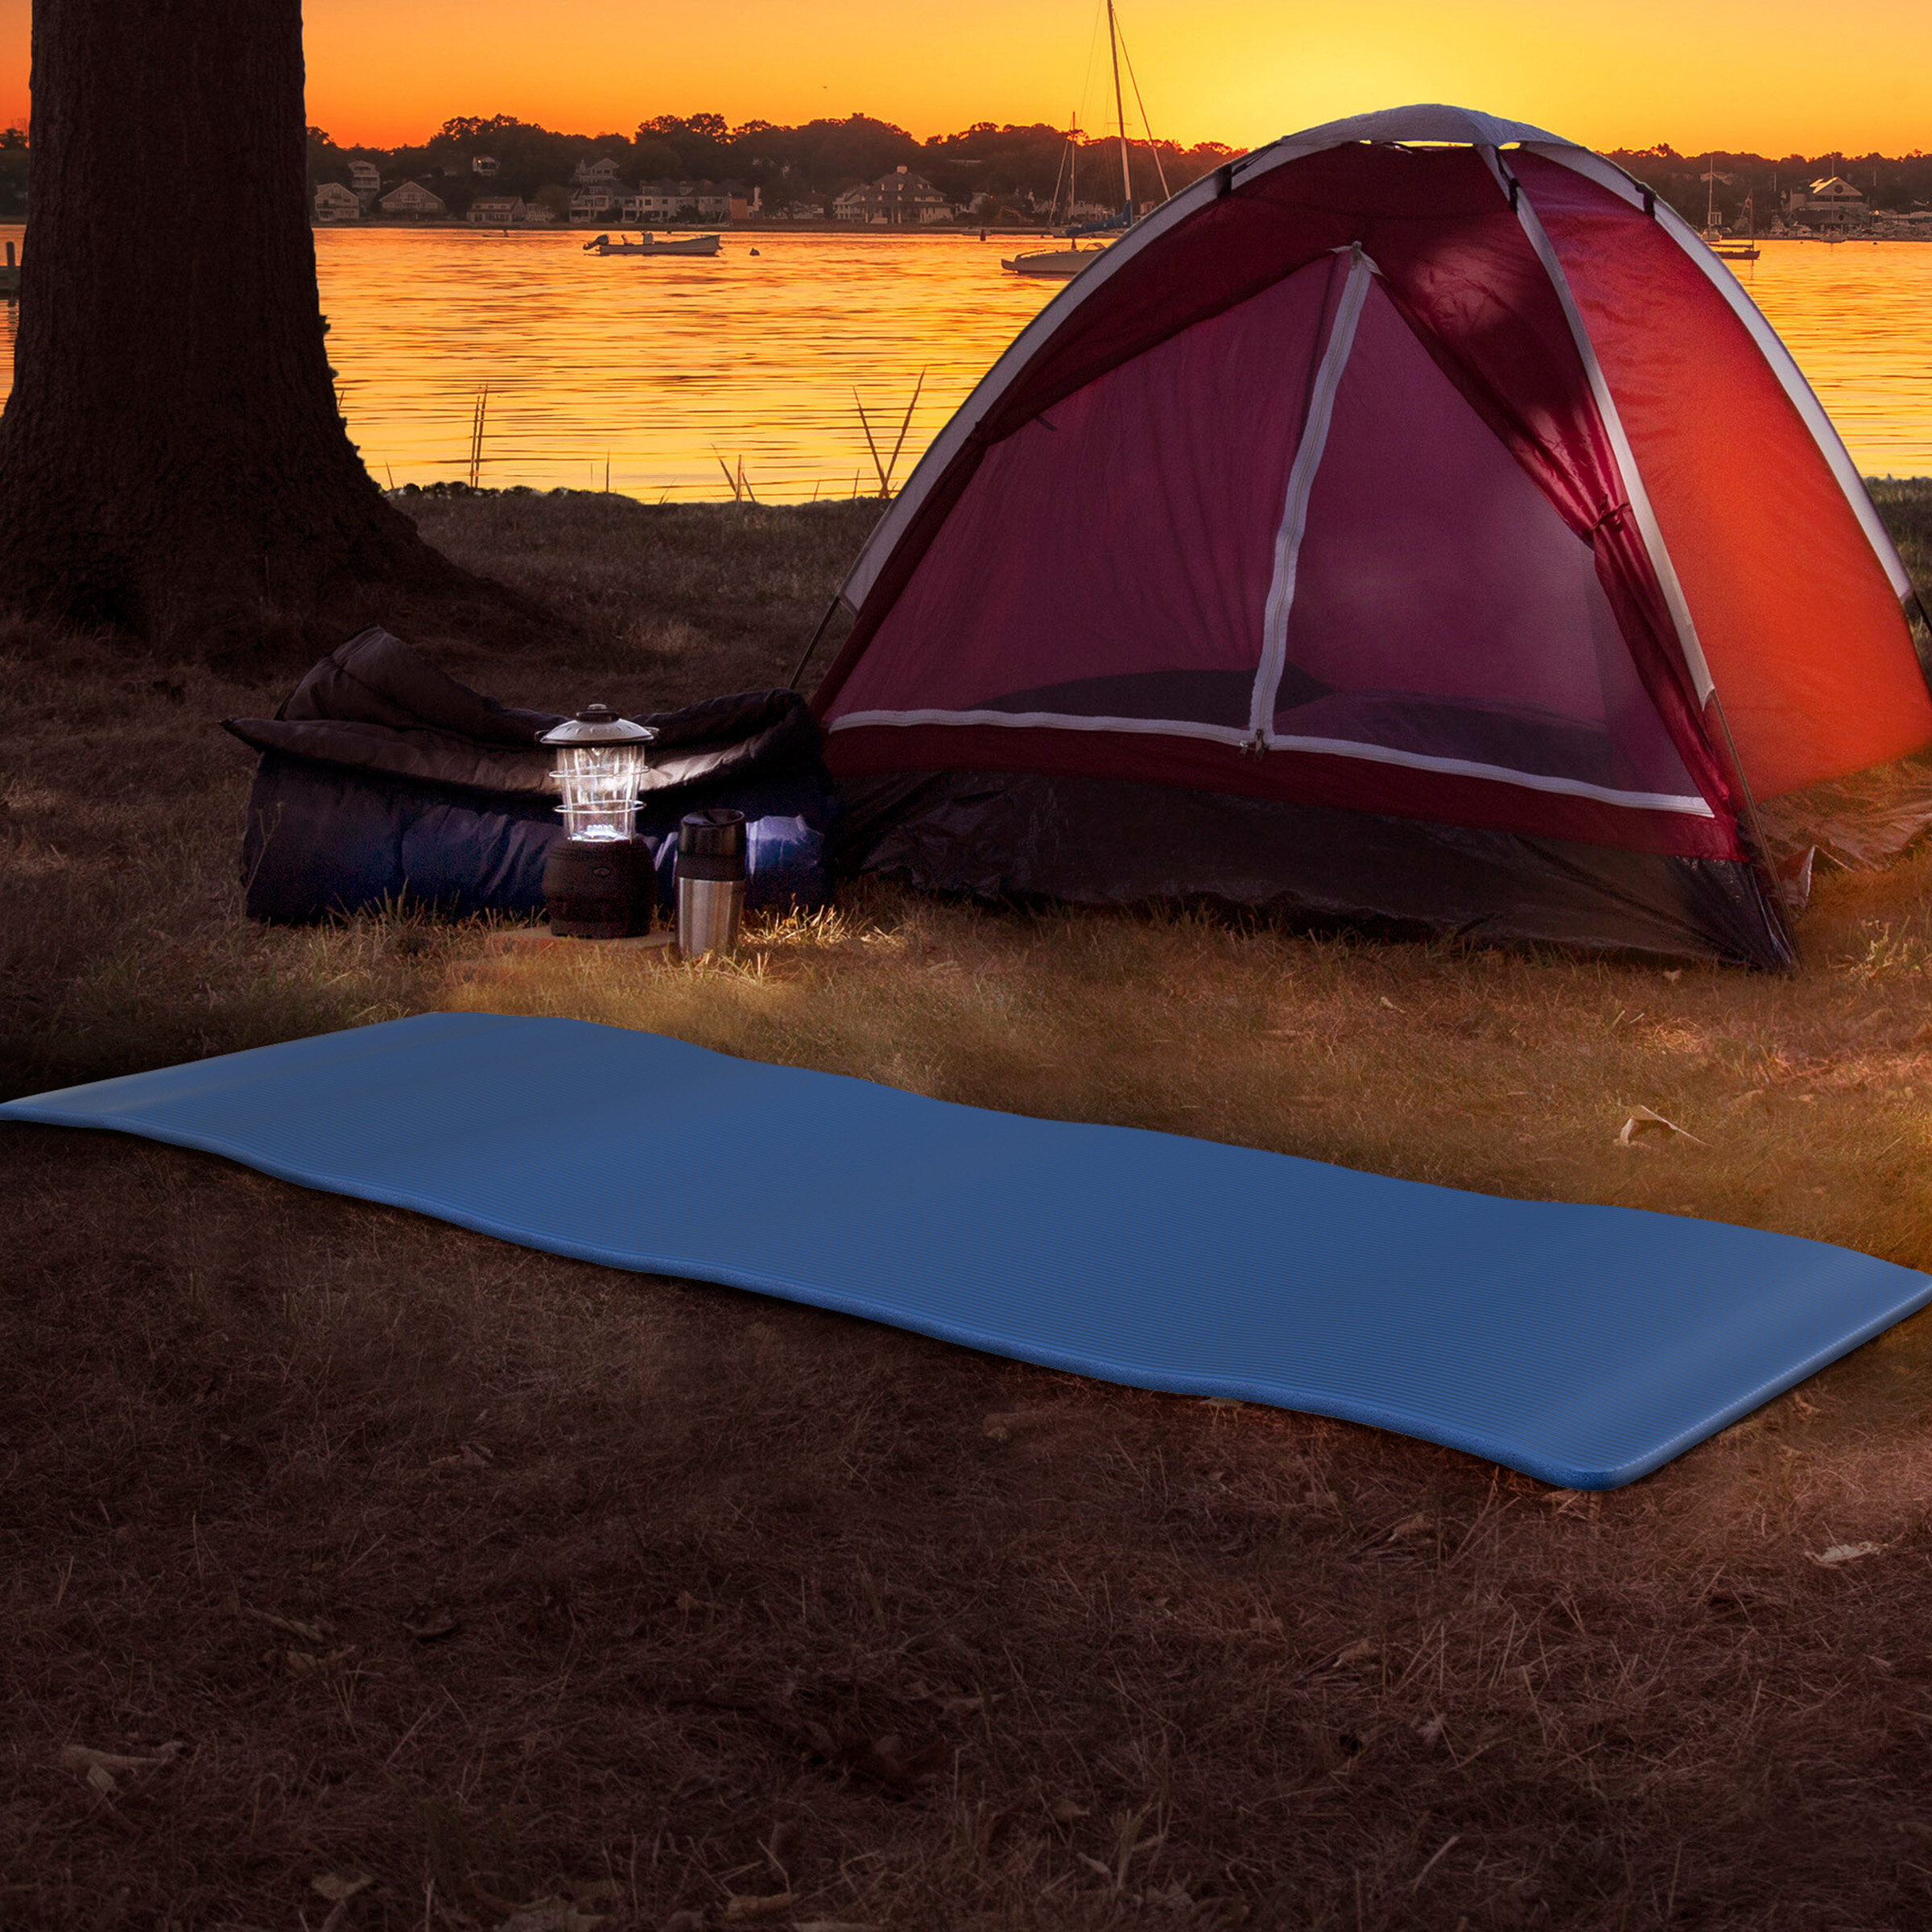 Foam Sleep Pad- Extra Thick Camping Mat for Cots, Tents, Sleeping Bags &  Sleepovers